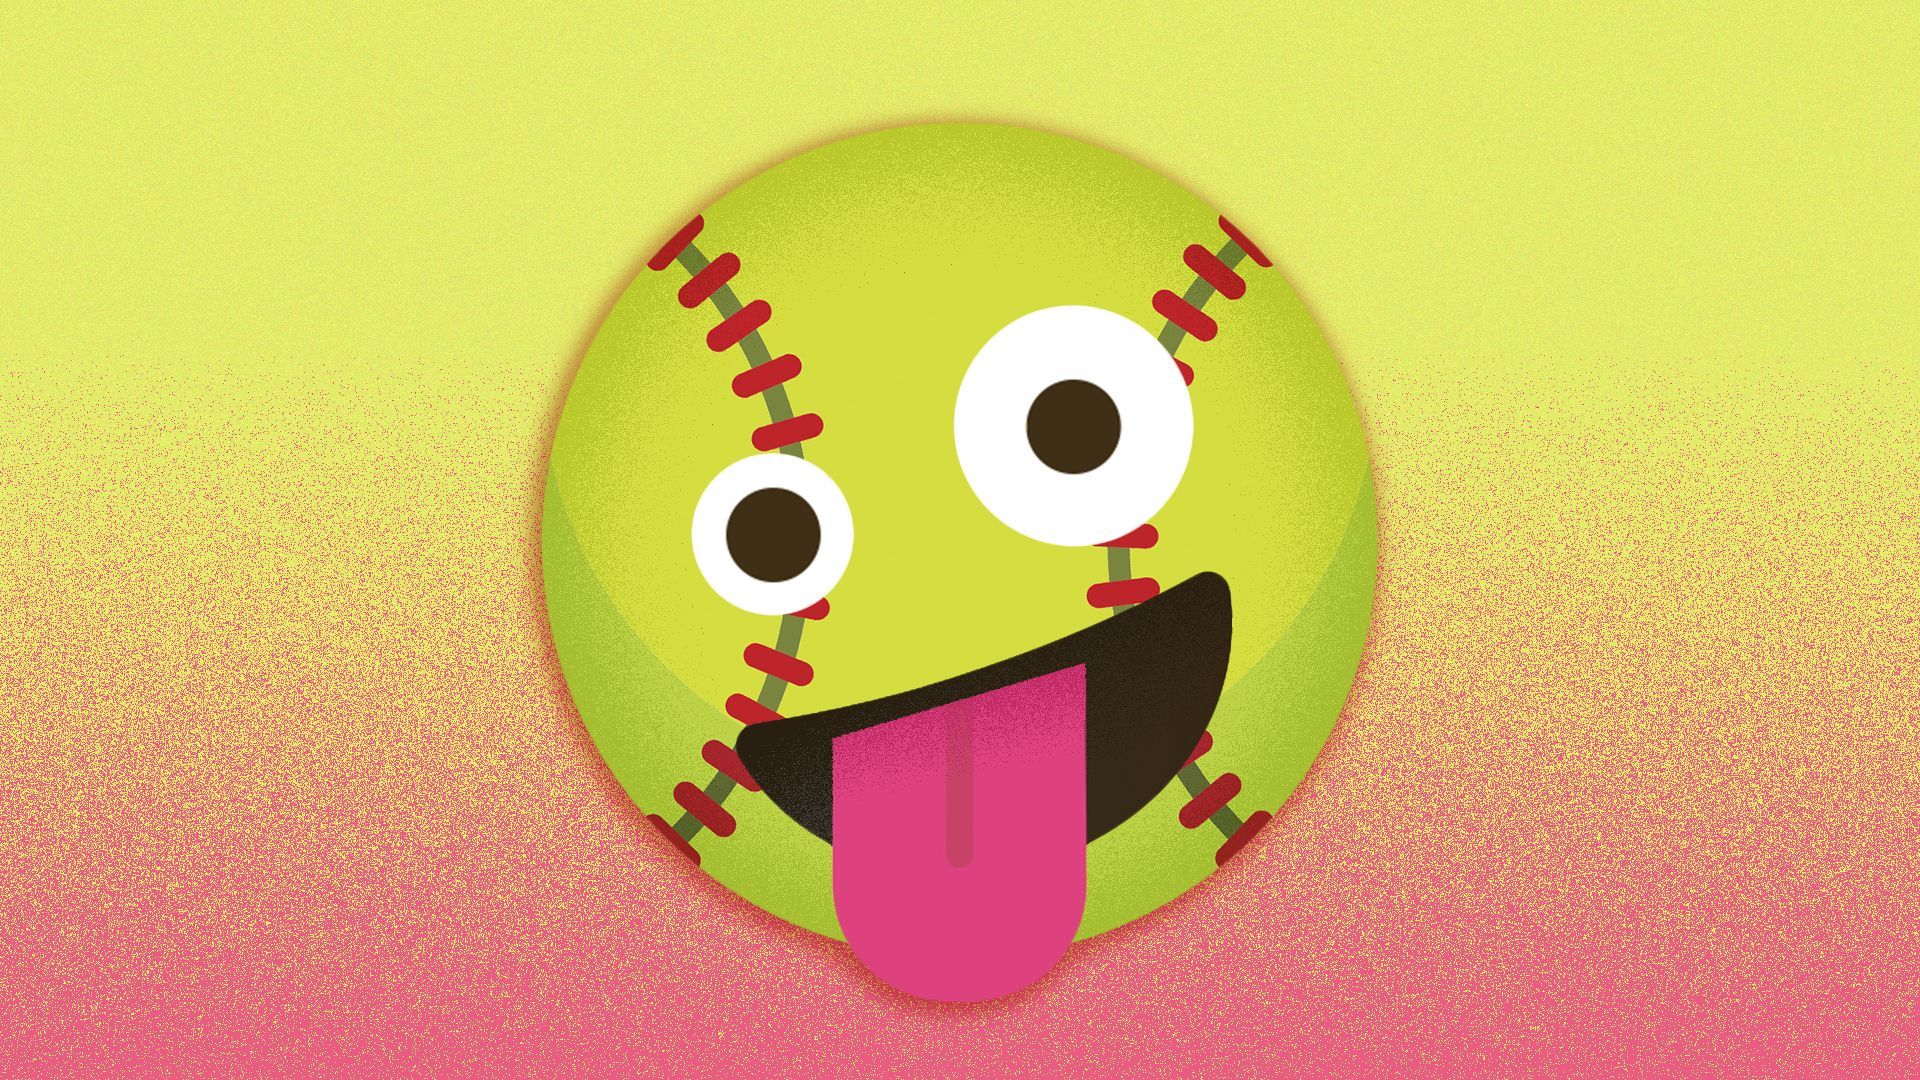 Illustration of a crazy softball emoji sticking its tongue out.